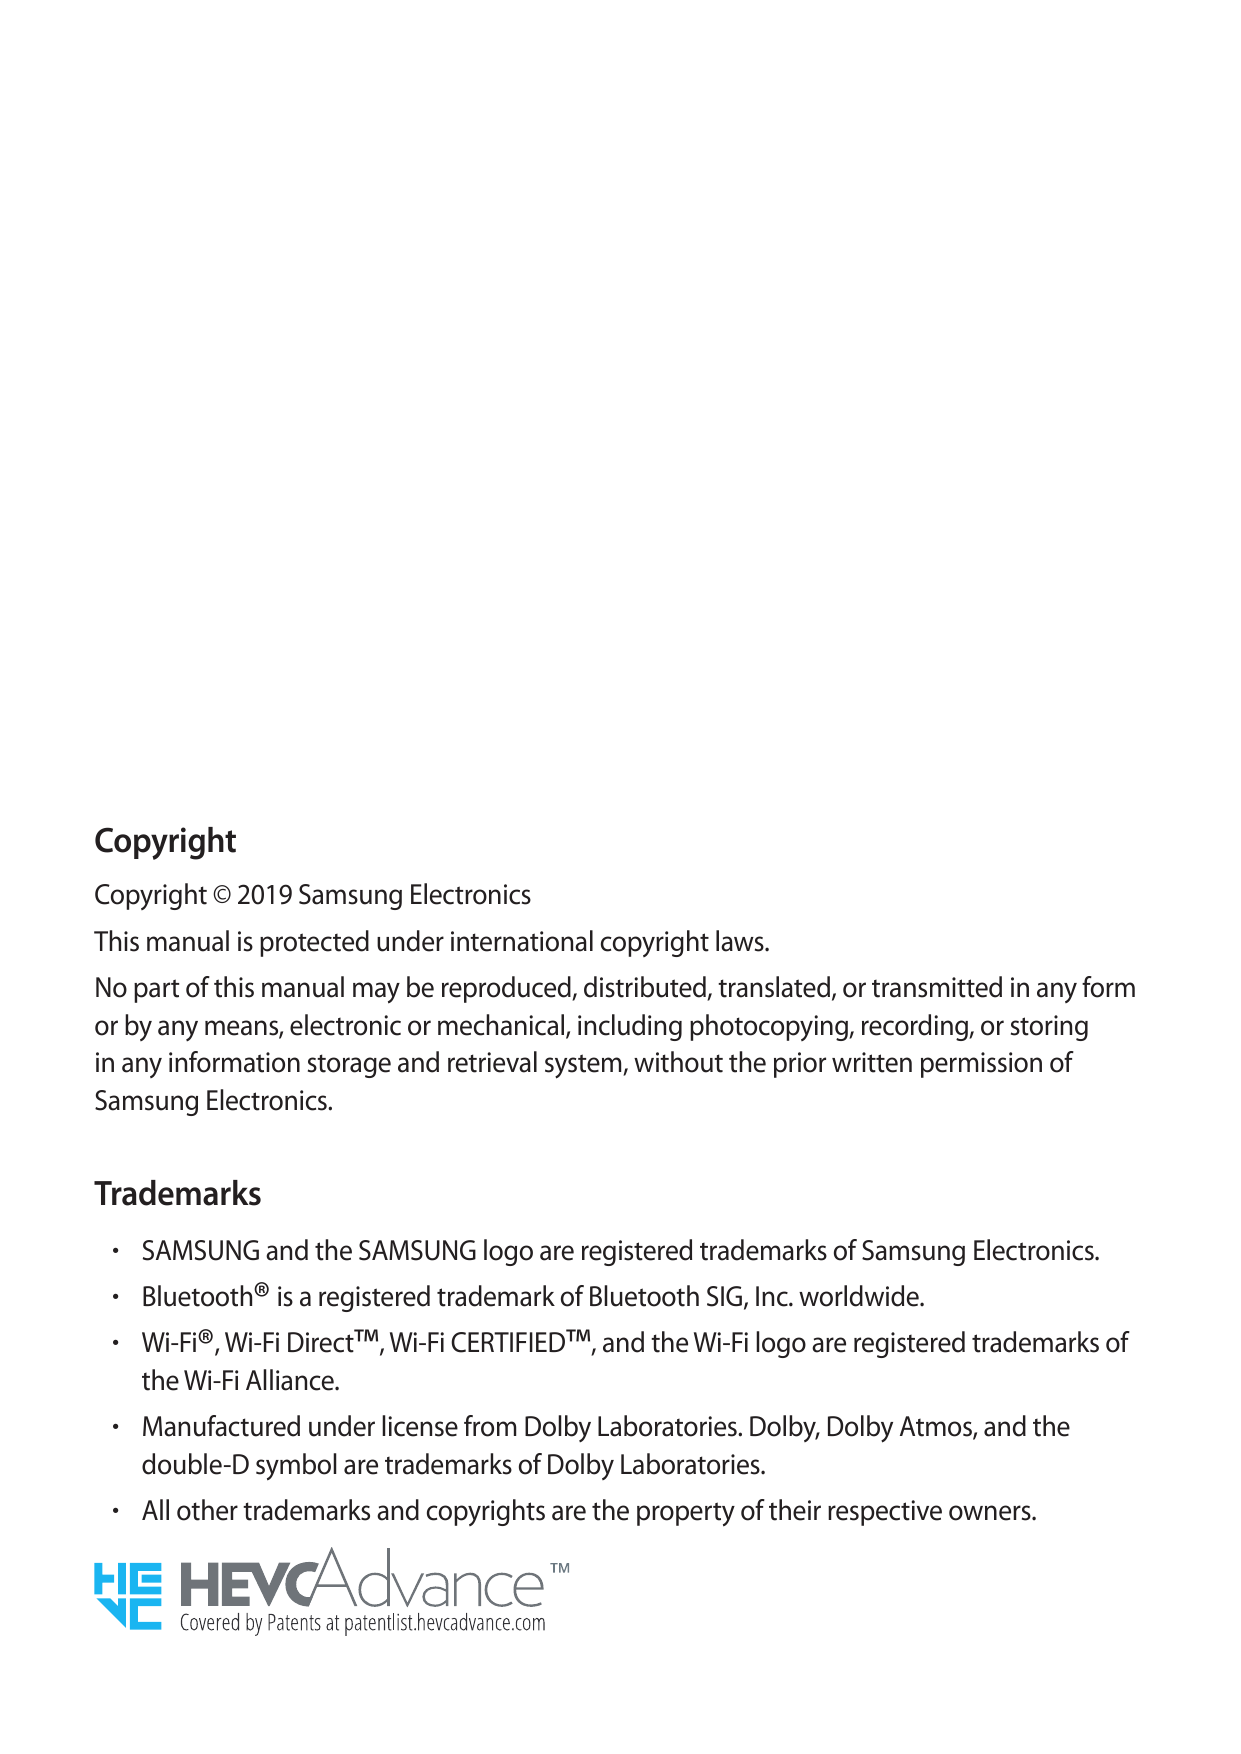 CopyrightCopyright © 2019 Samsung ElectronicsThis manual is protected under international copyright laws.No part of this manual 